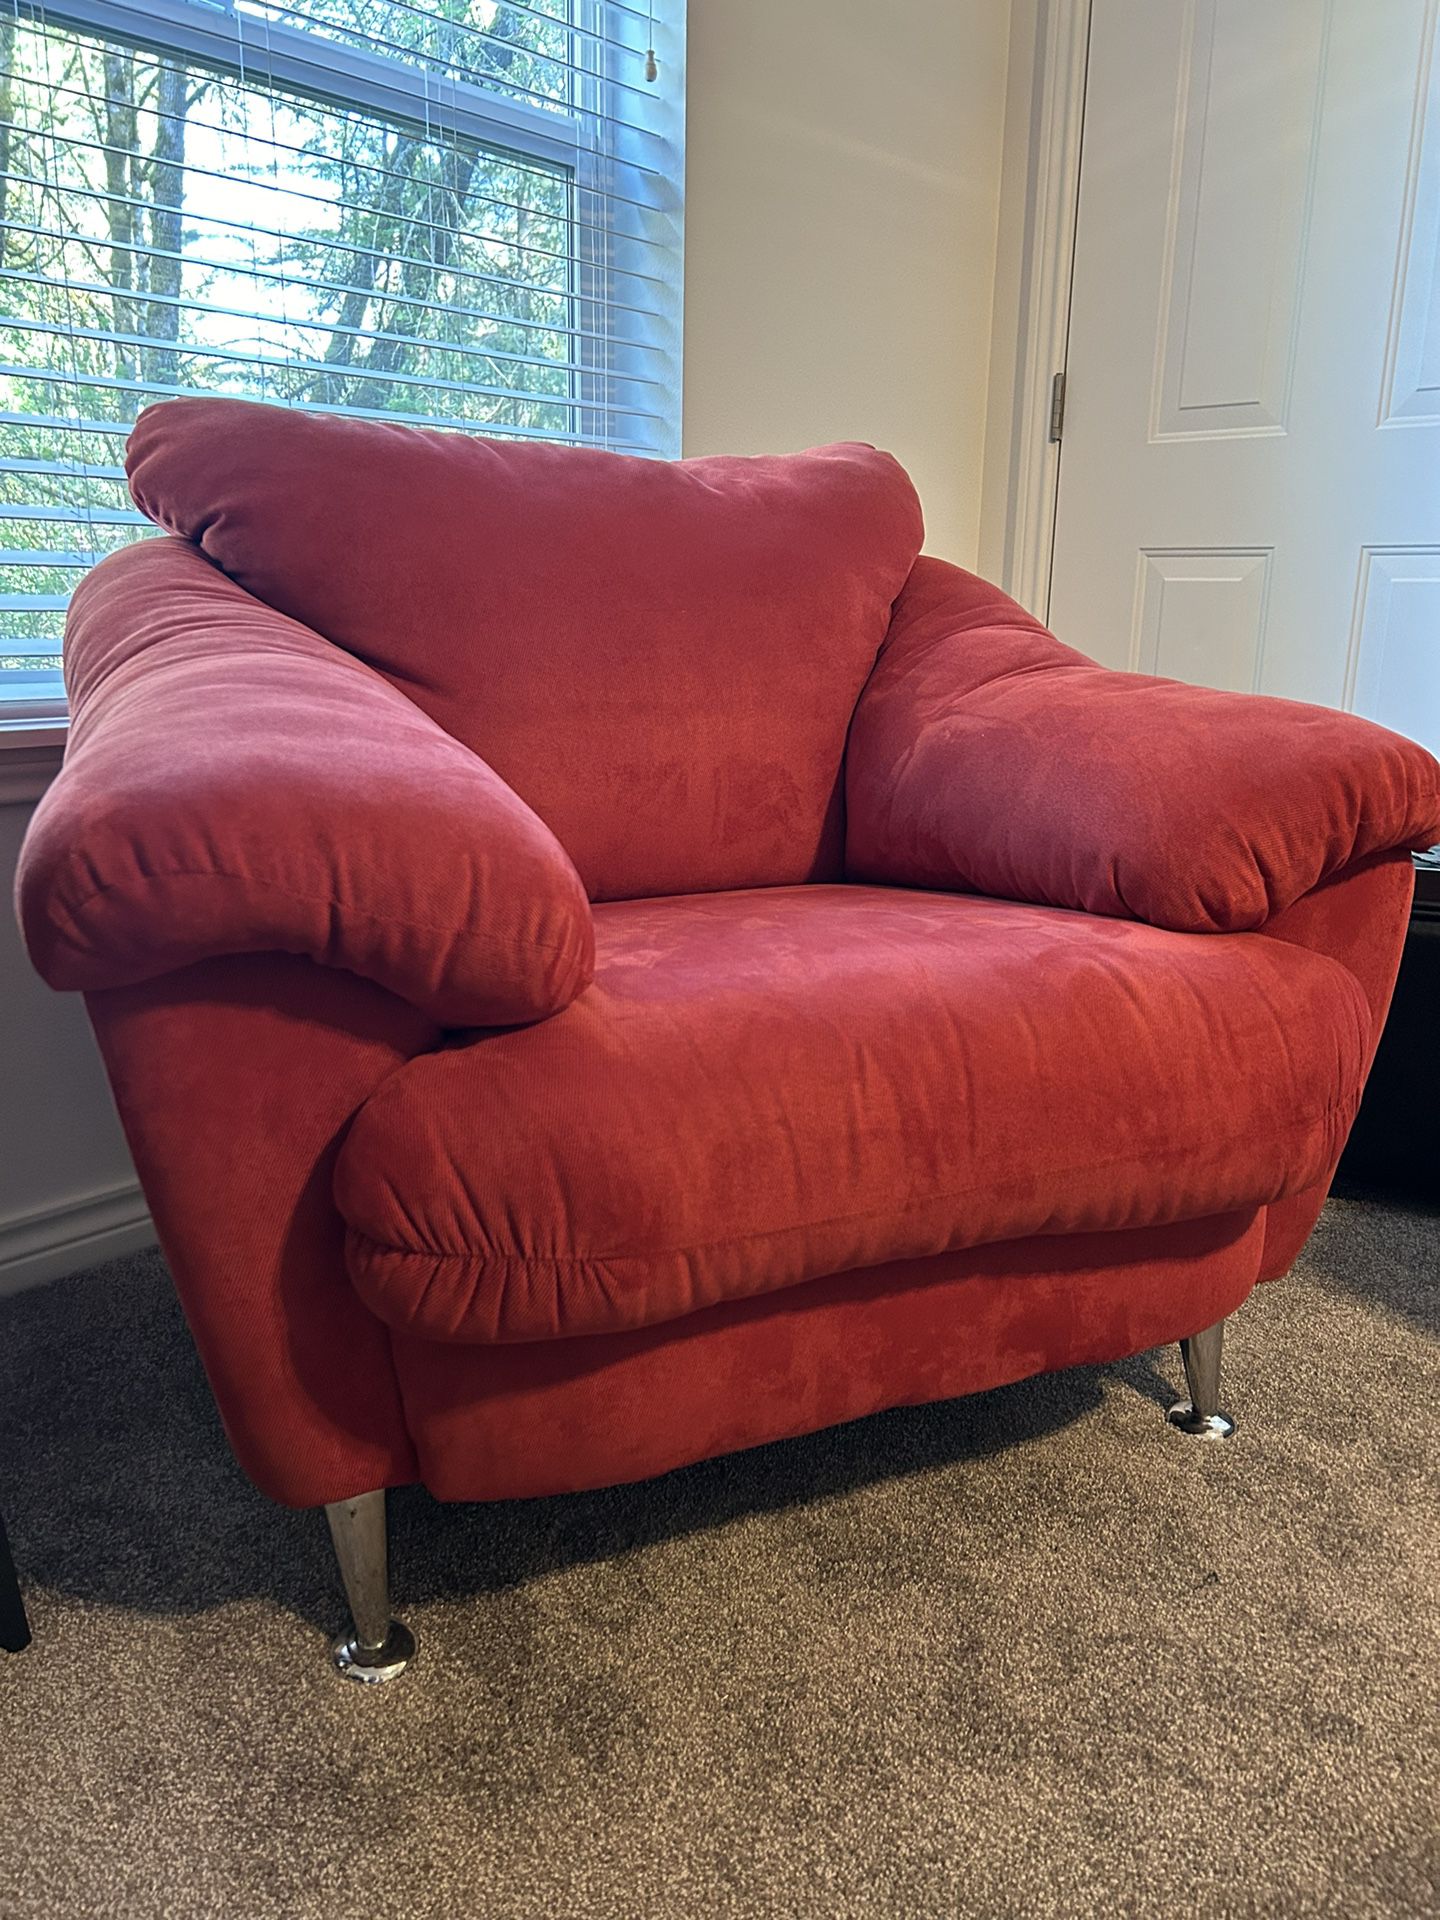 Red Oversized Comfortable Chair